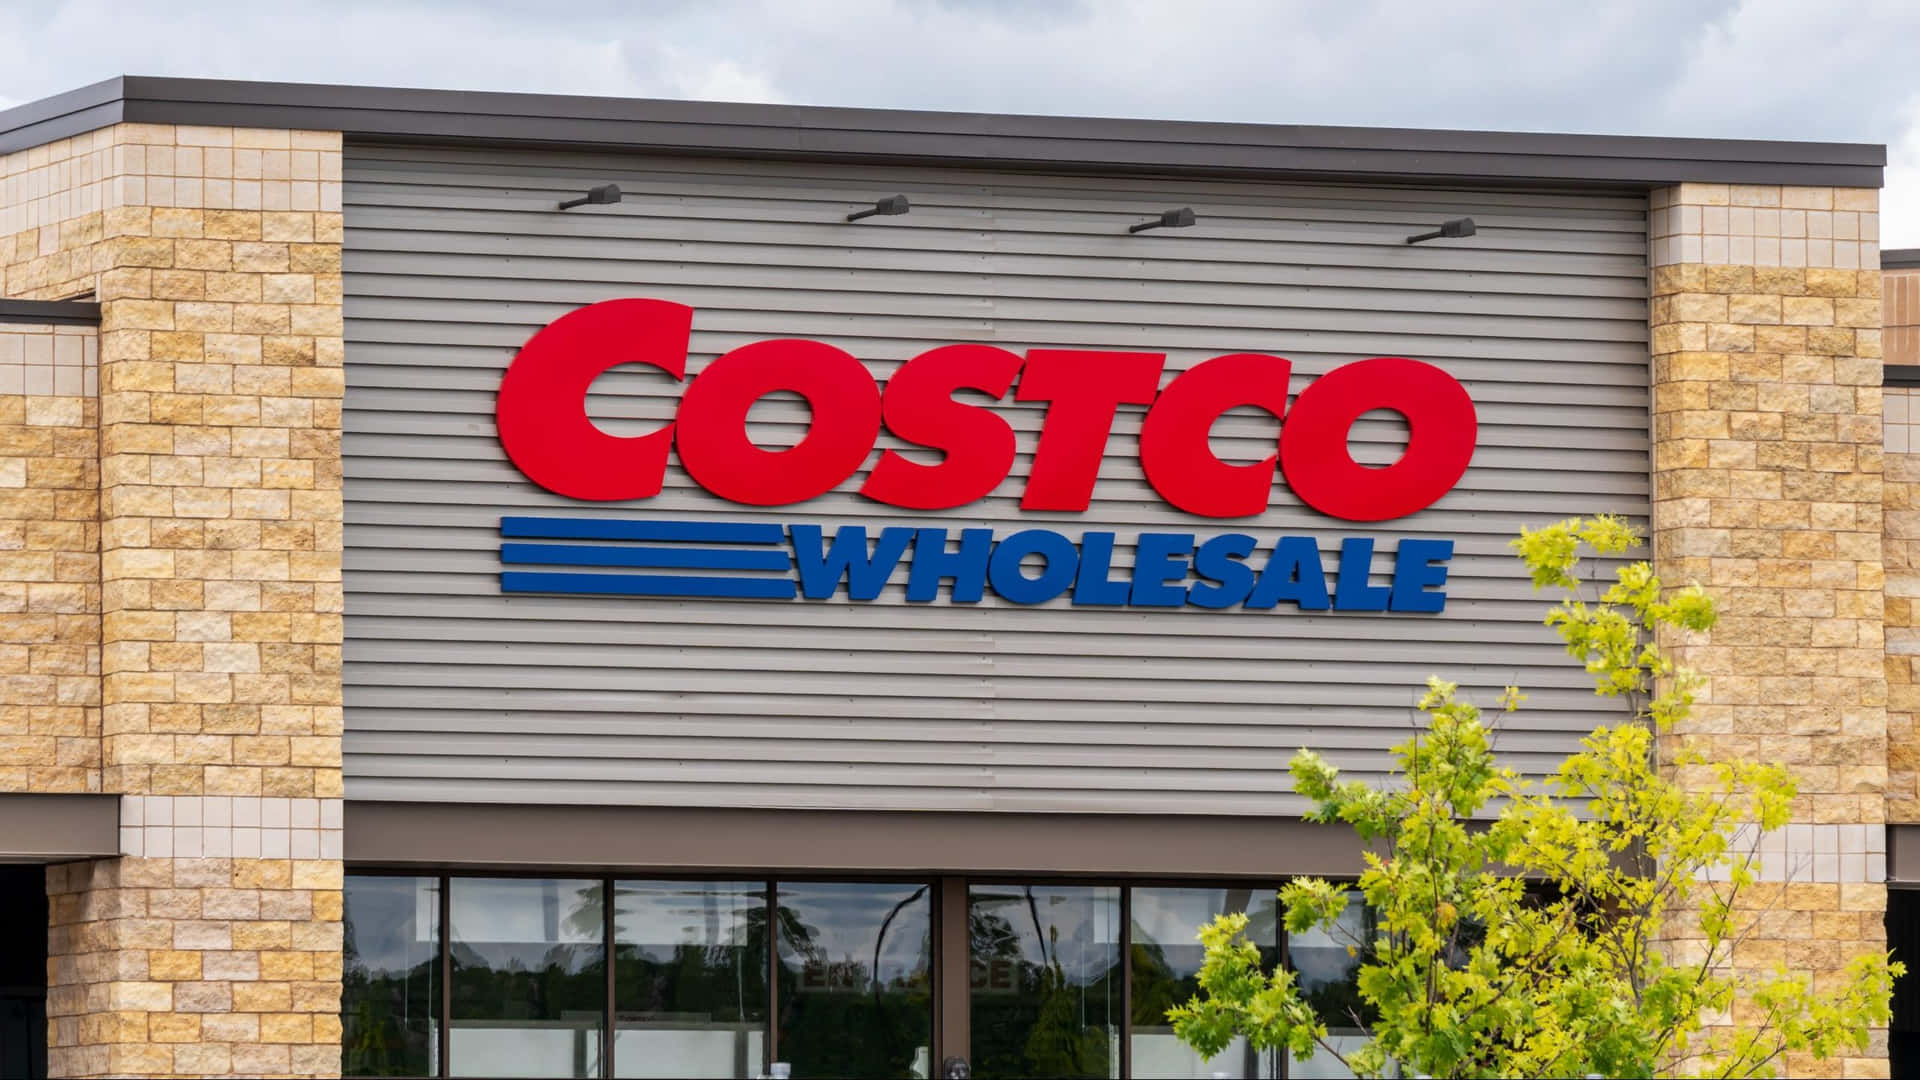 Stock Up on Supplies at Your Local Costco